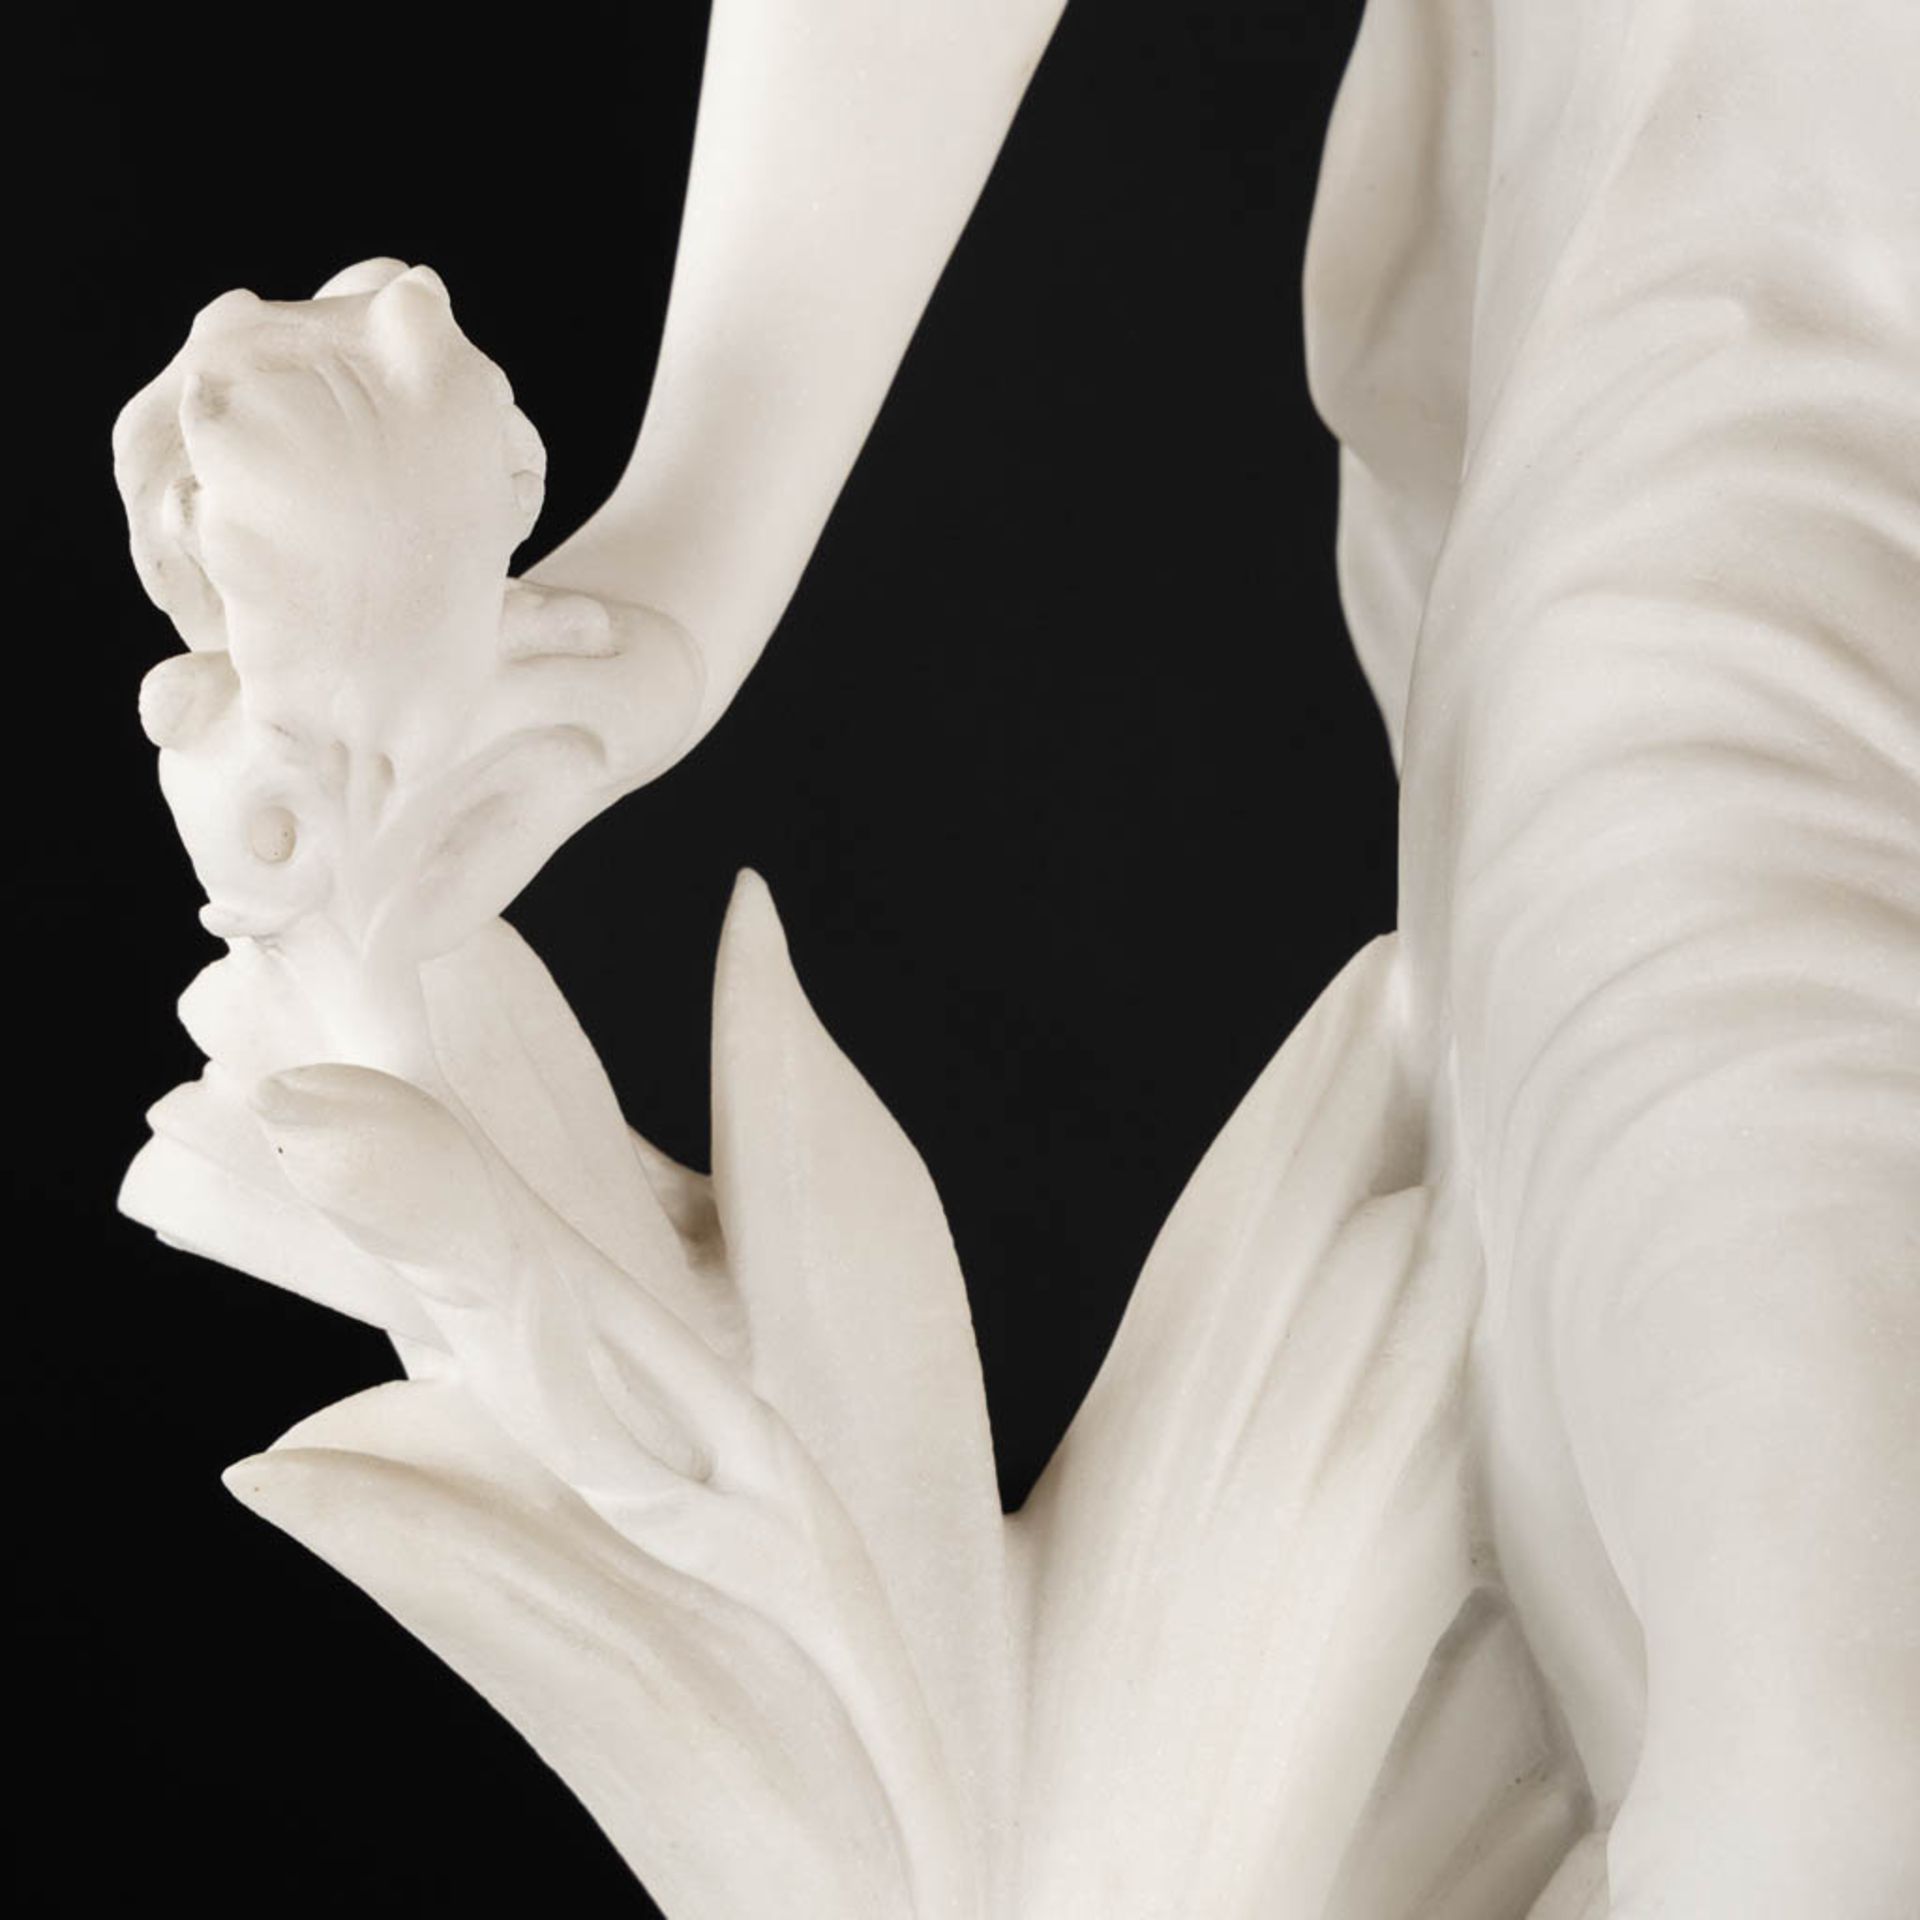 Hippolyte MOREAU (1832-1927) 'Lady with flowers' sculptured Carrara marble. (L:25 x W:35 x H:80 cm) - Image 11 of 12